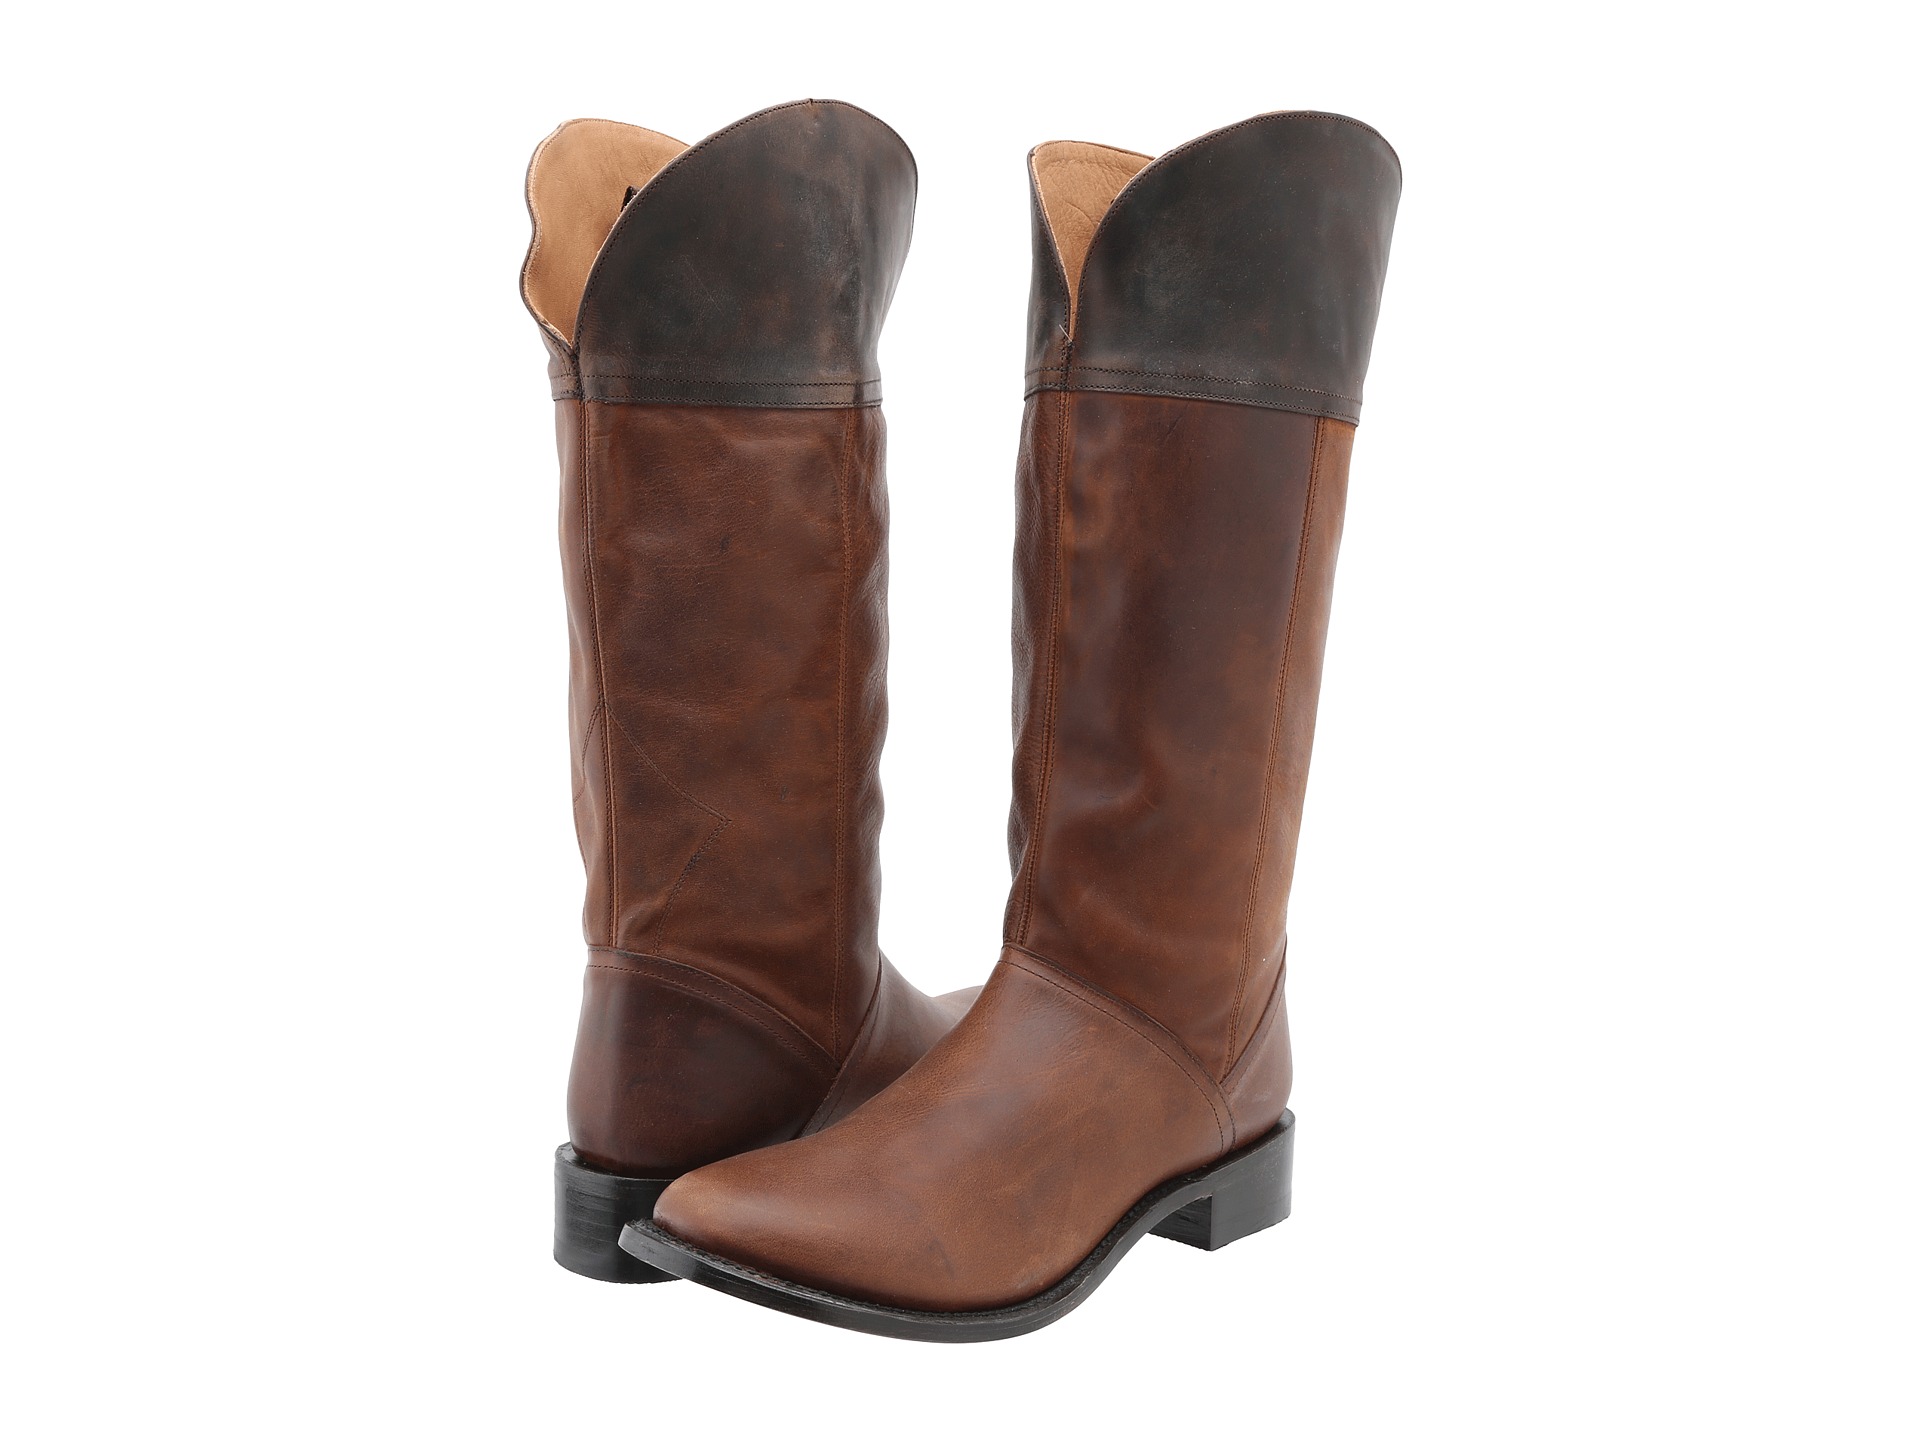 ... Riding Boot Oiled Chestnut Cow Leather | Shipped Free at Zappos